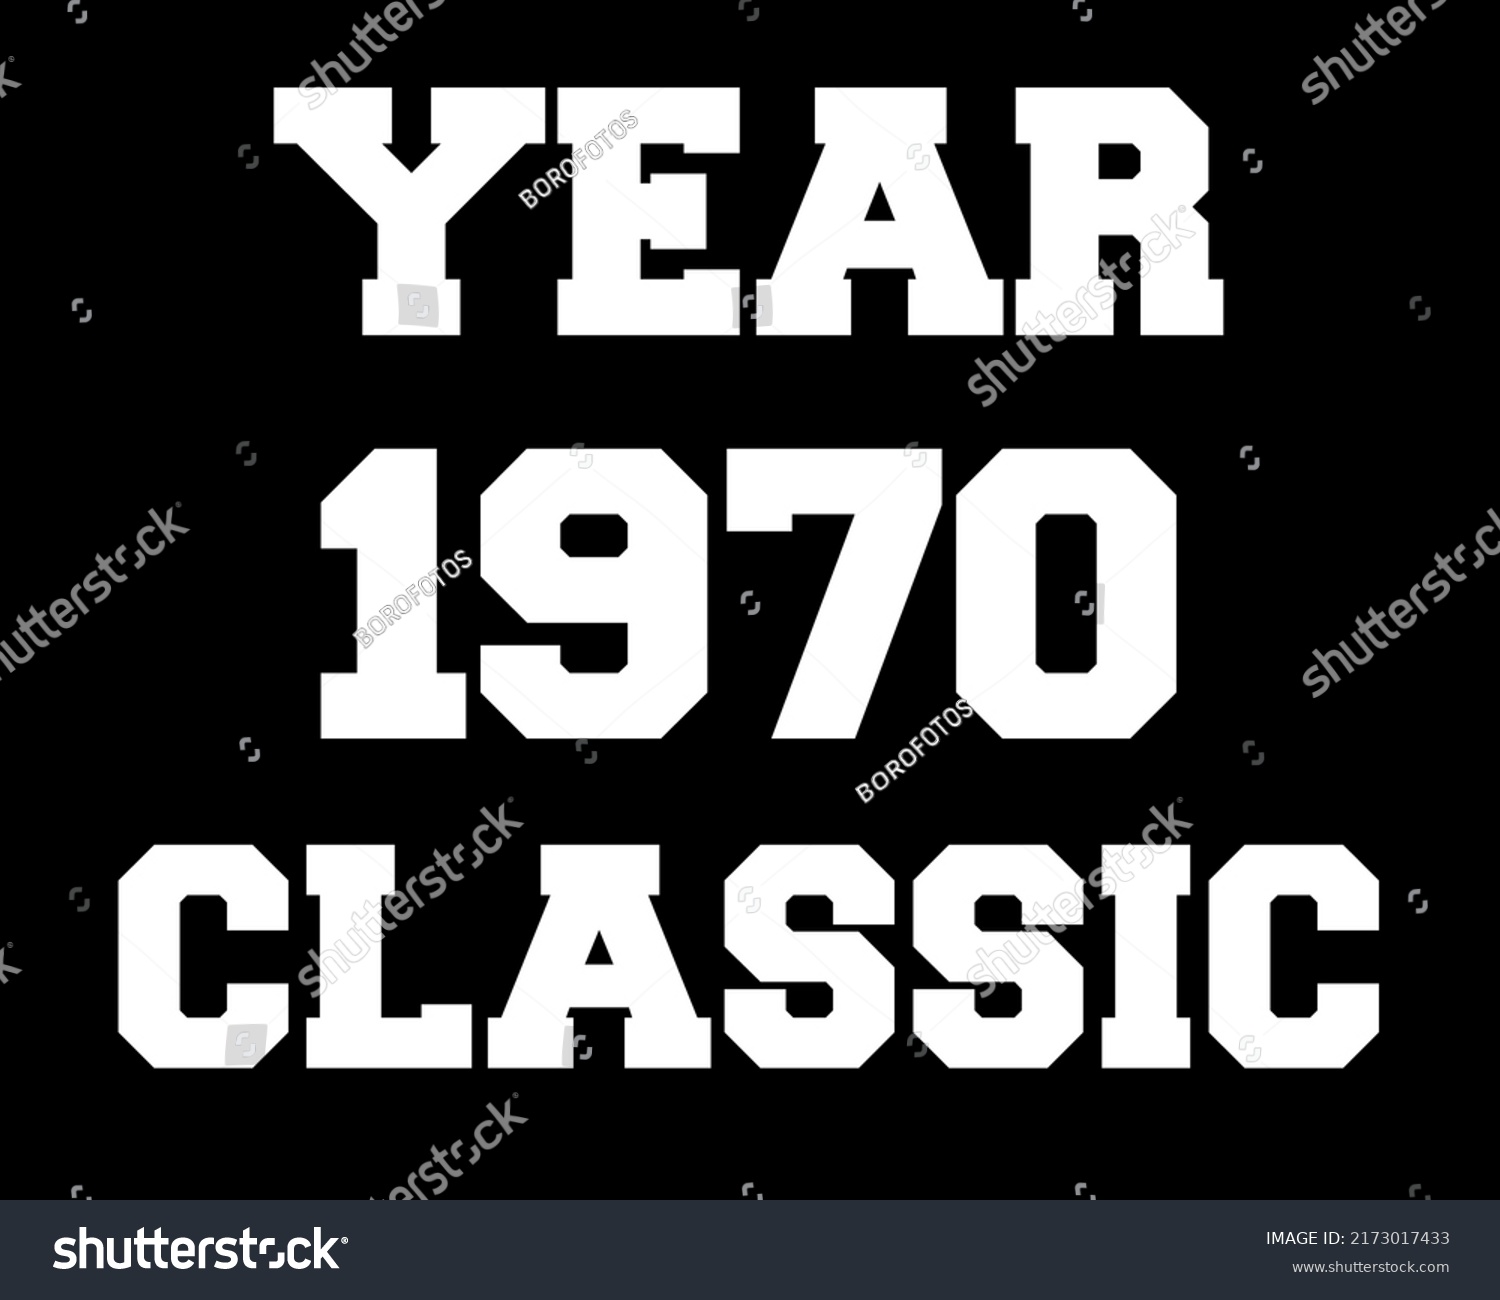 Year 1970 classic. Vector with white celebratory year on black background. #2173017433